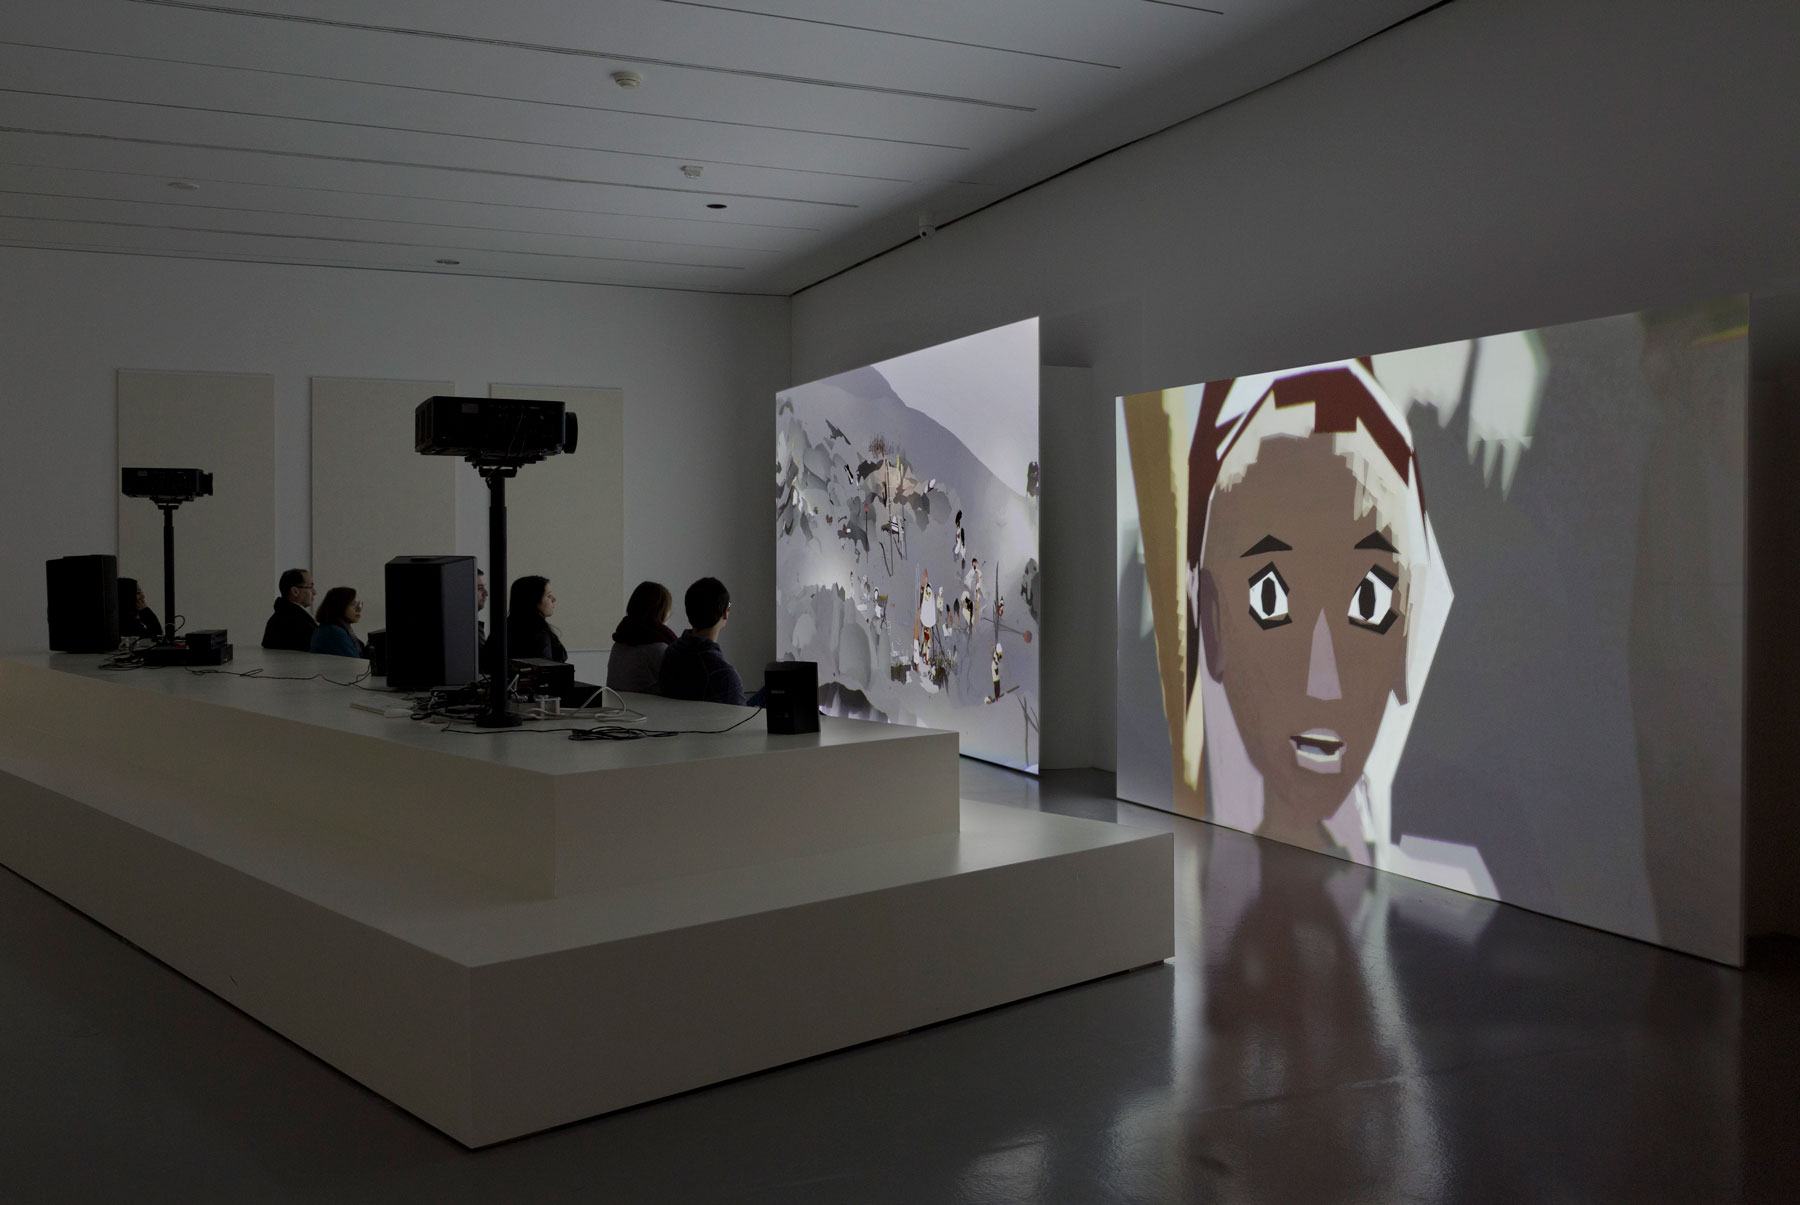 Installation view Ian Cheng. Photo: Cathy Carver, Hirshhorn Museum